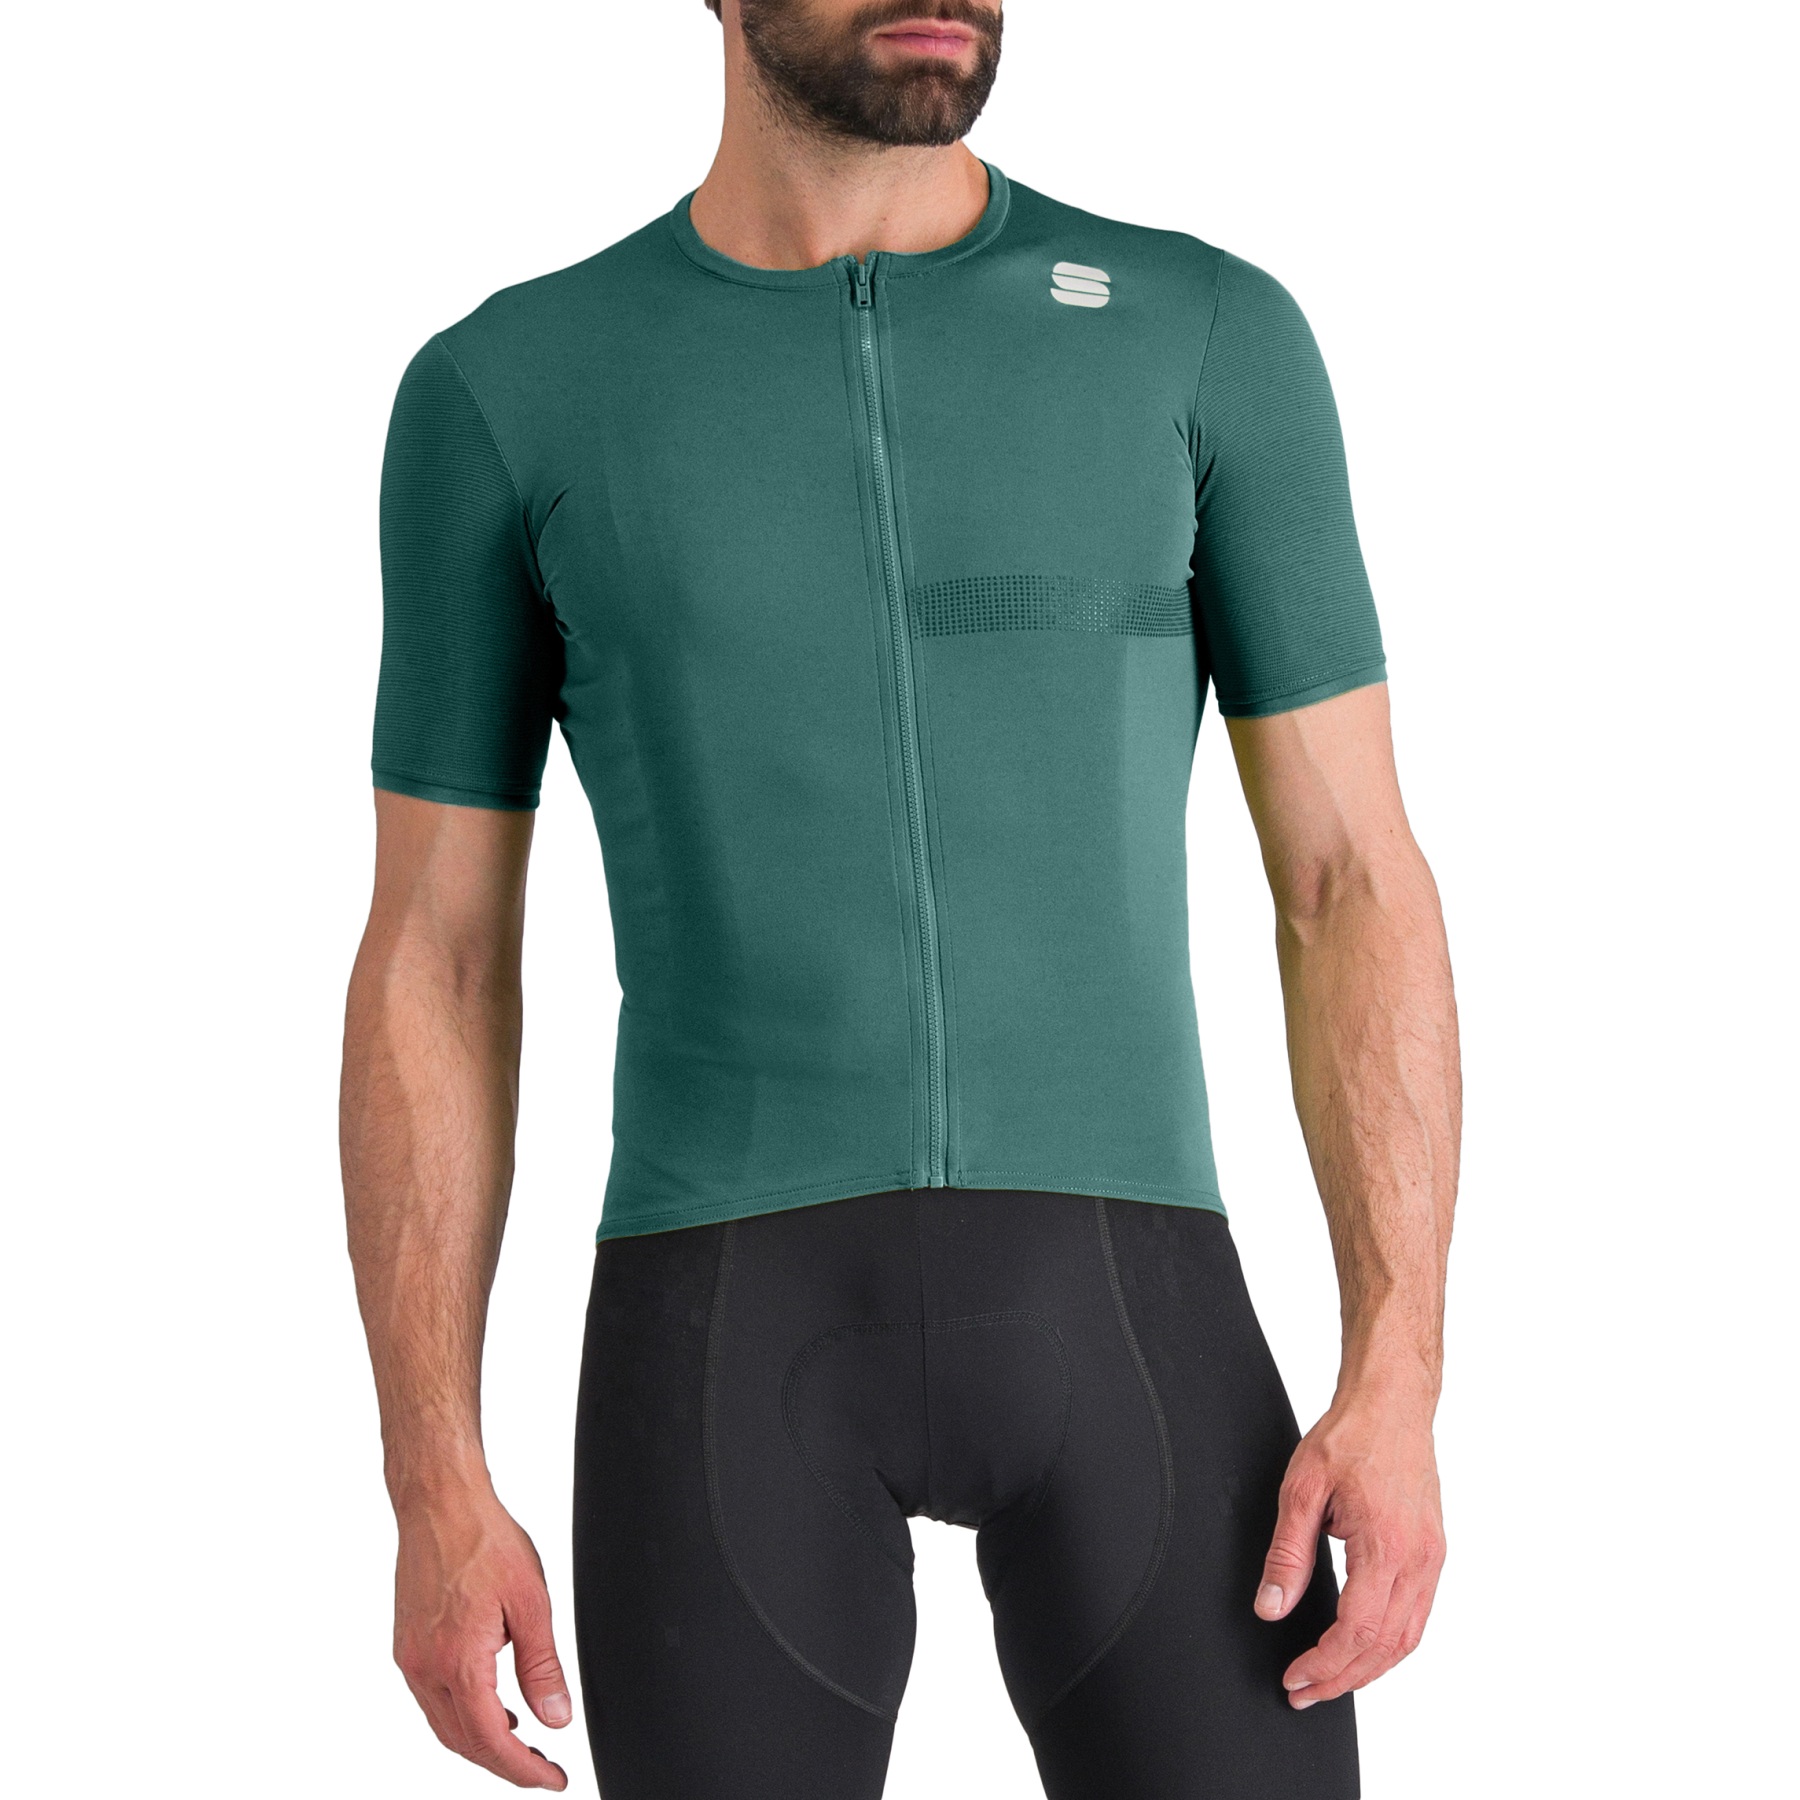 Picture of Sportful Matchy Short Sleeve Jersey Men - 3000 Shrub Green